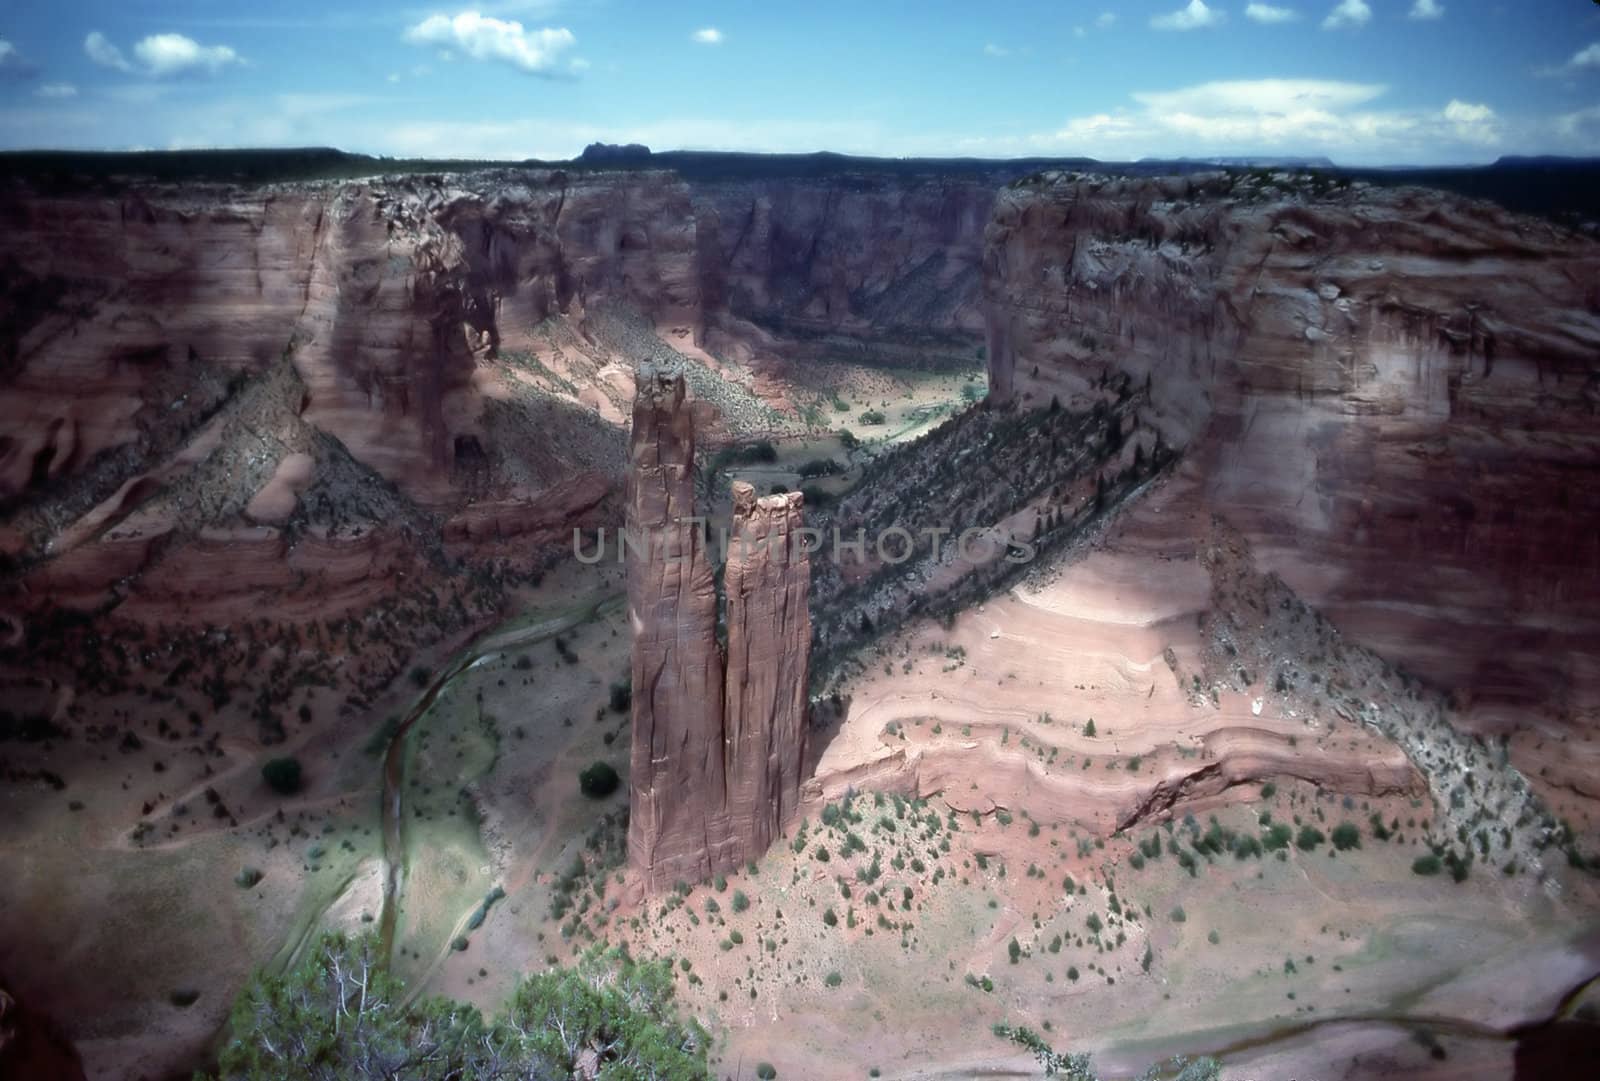 Spider Rock in Canyon de Chelly, Arizona by jol66